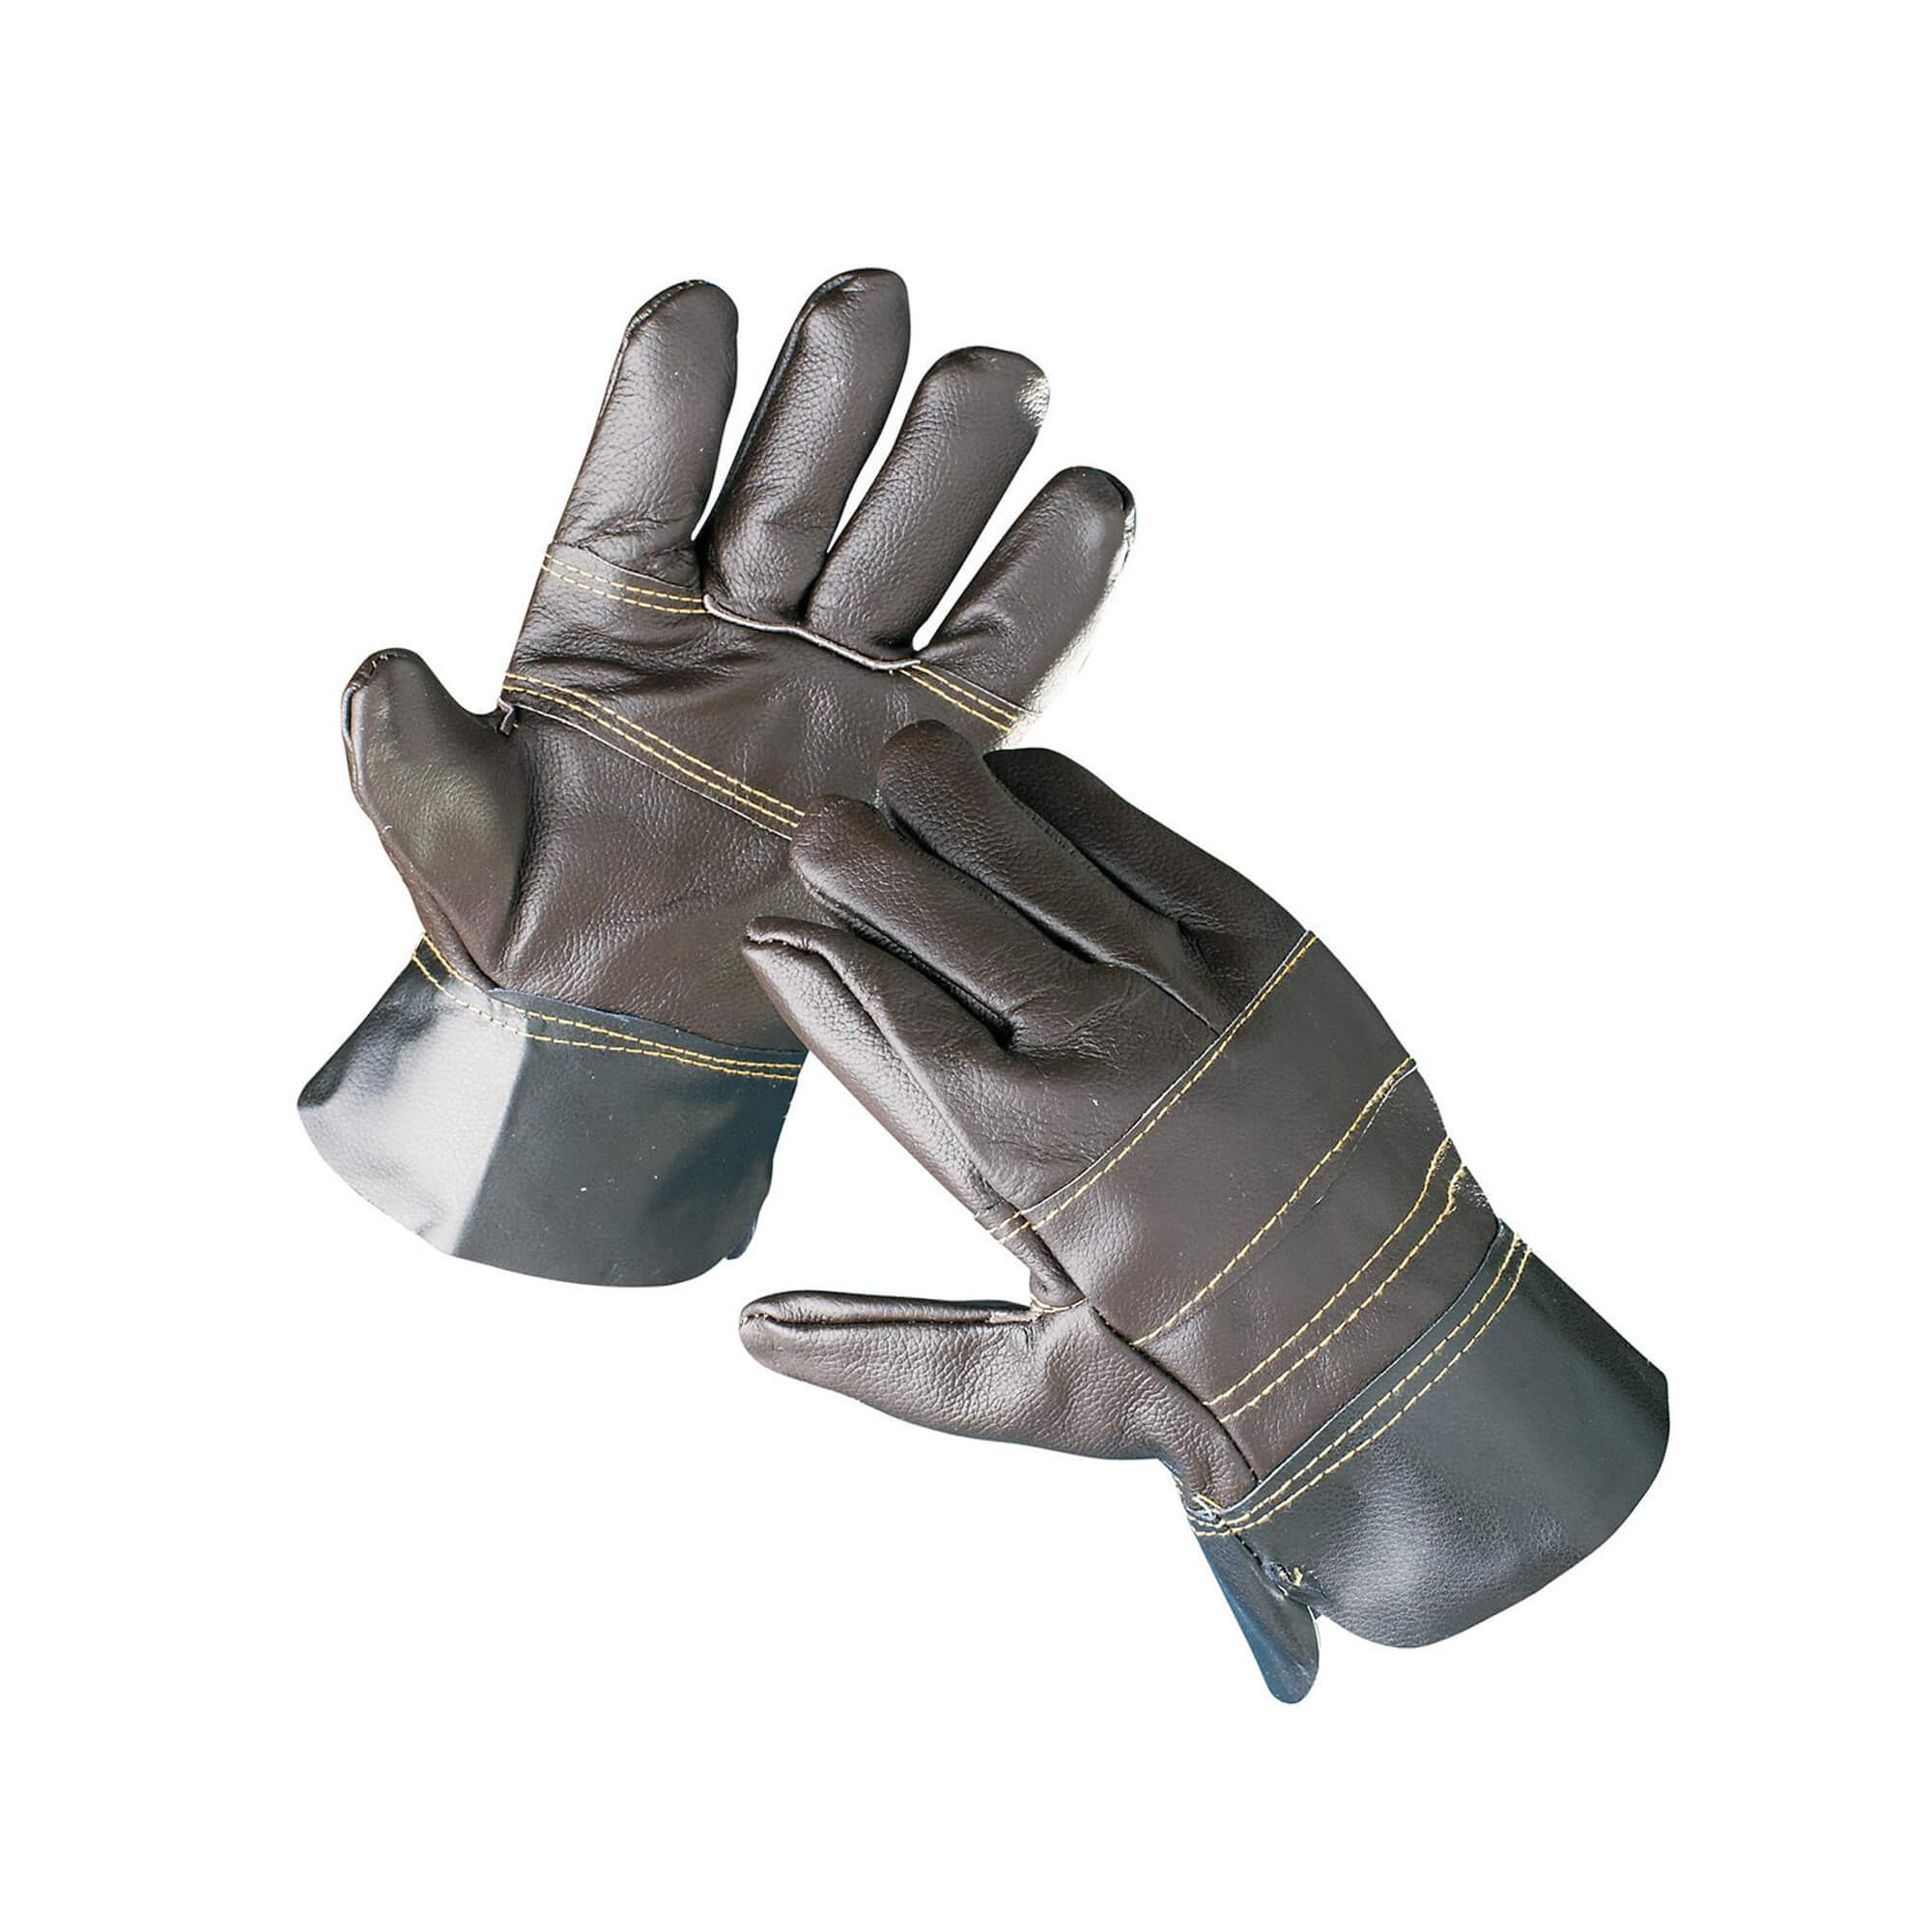 Protective full leather work gloves Francolin